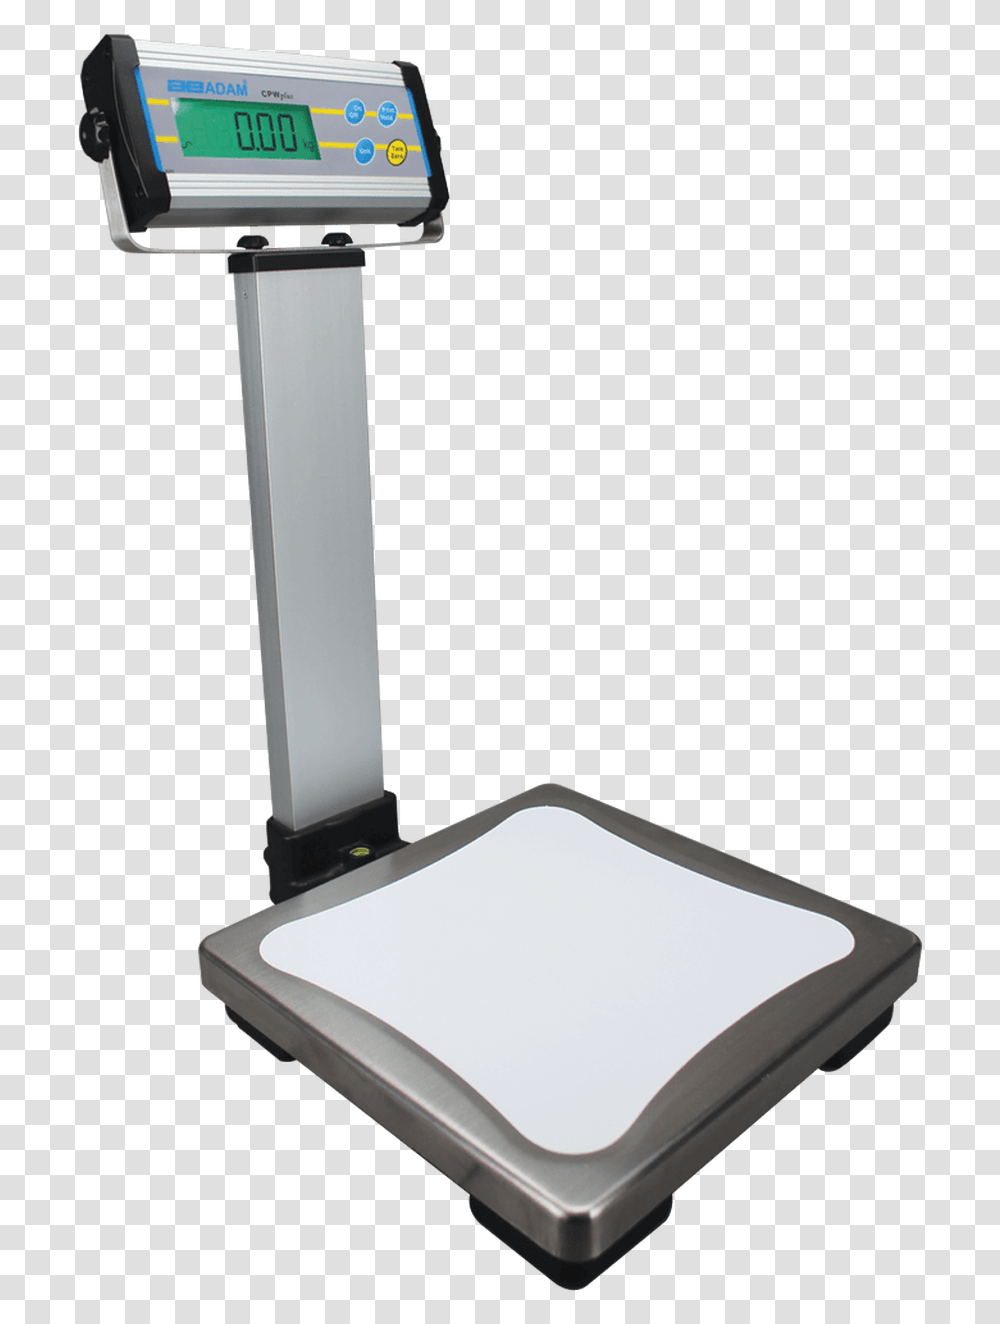 Cpwplus 75p Weighing Scale Transparent Png